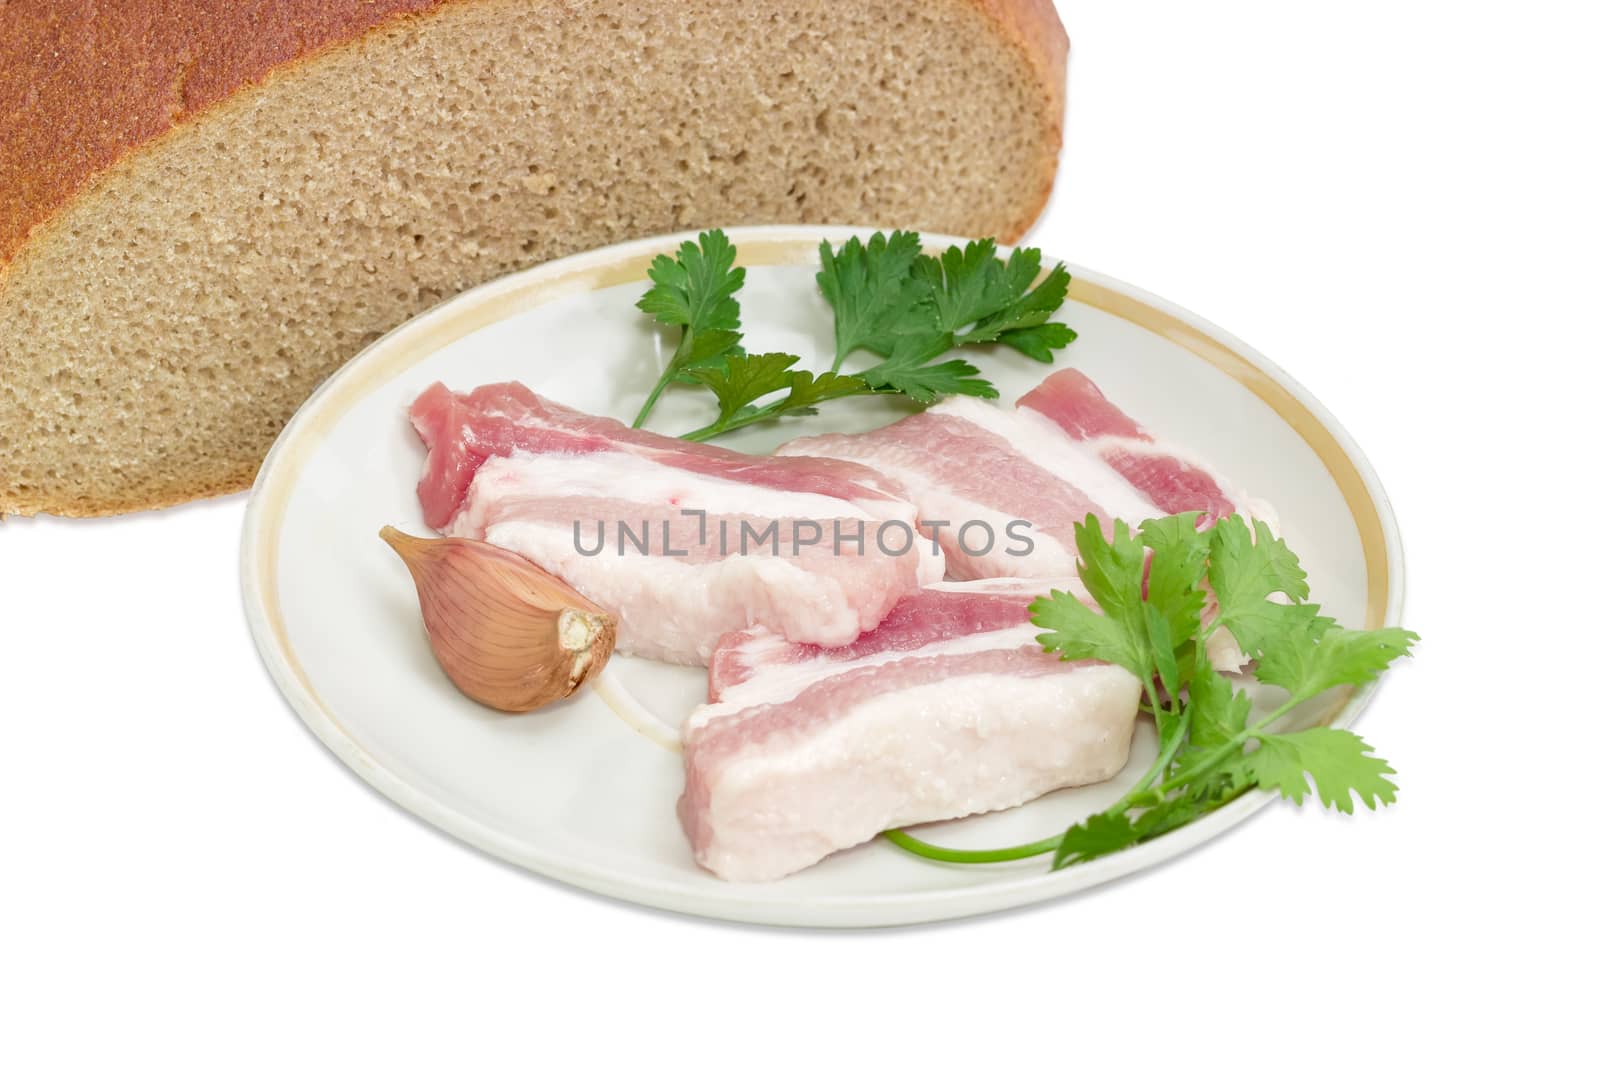 Several slices of uncooked streaky pork belly bacon, garlic, twigs of parsley and cilantro on saucer against the background of cut hearth brown bread closeup on a light background 
